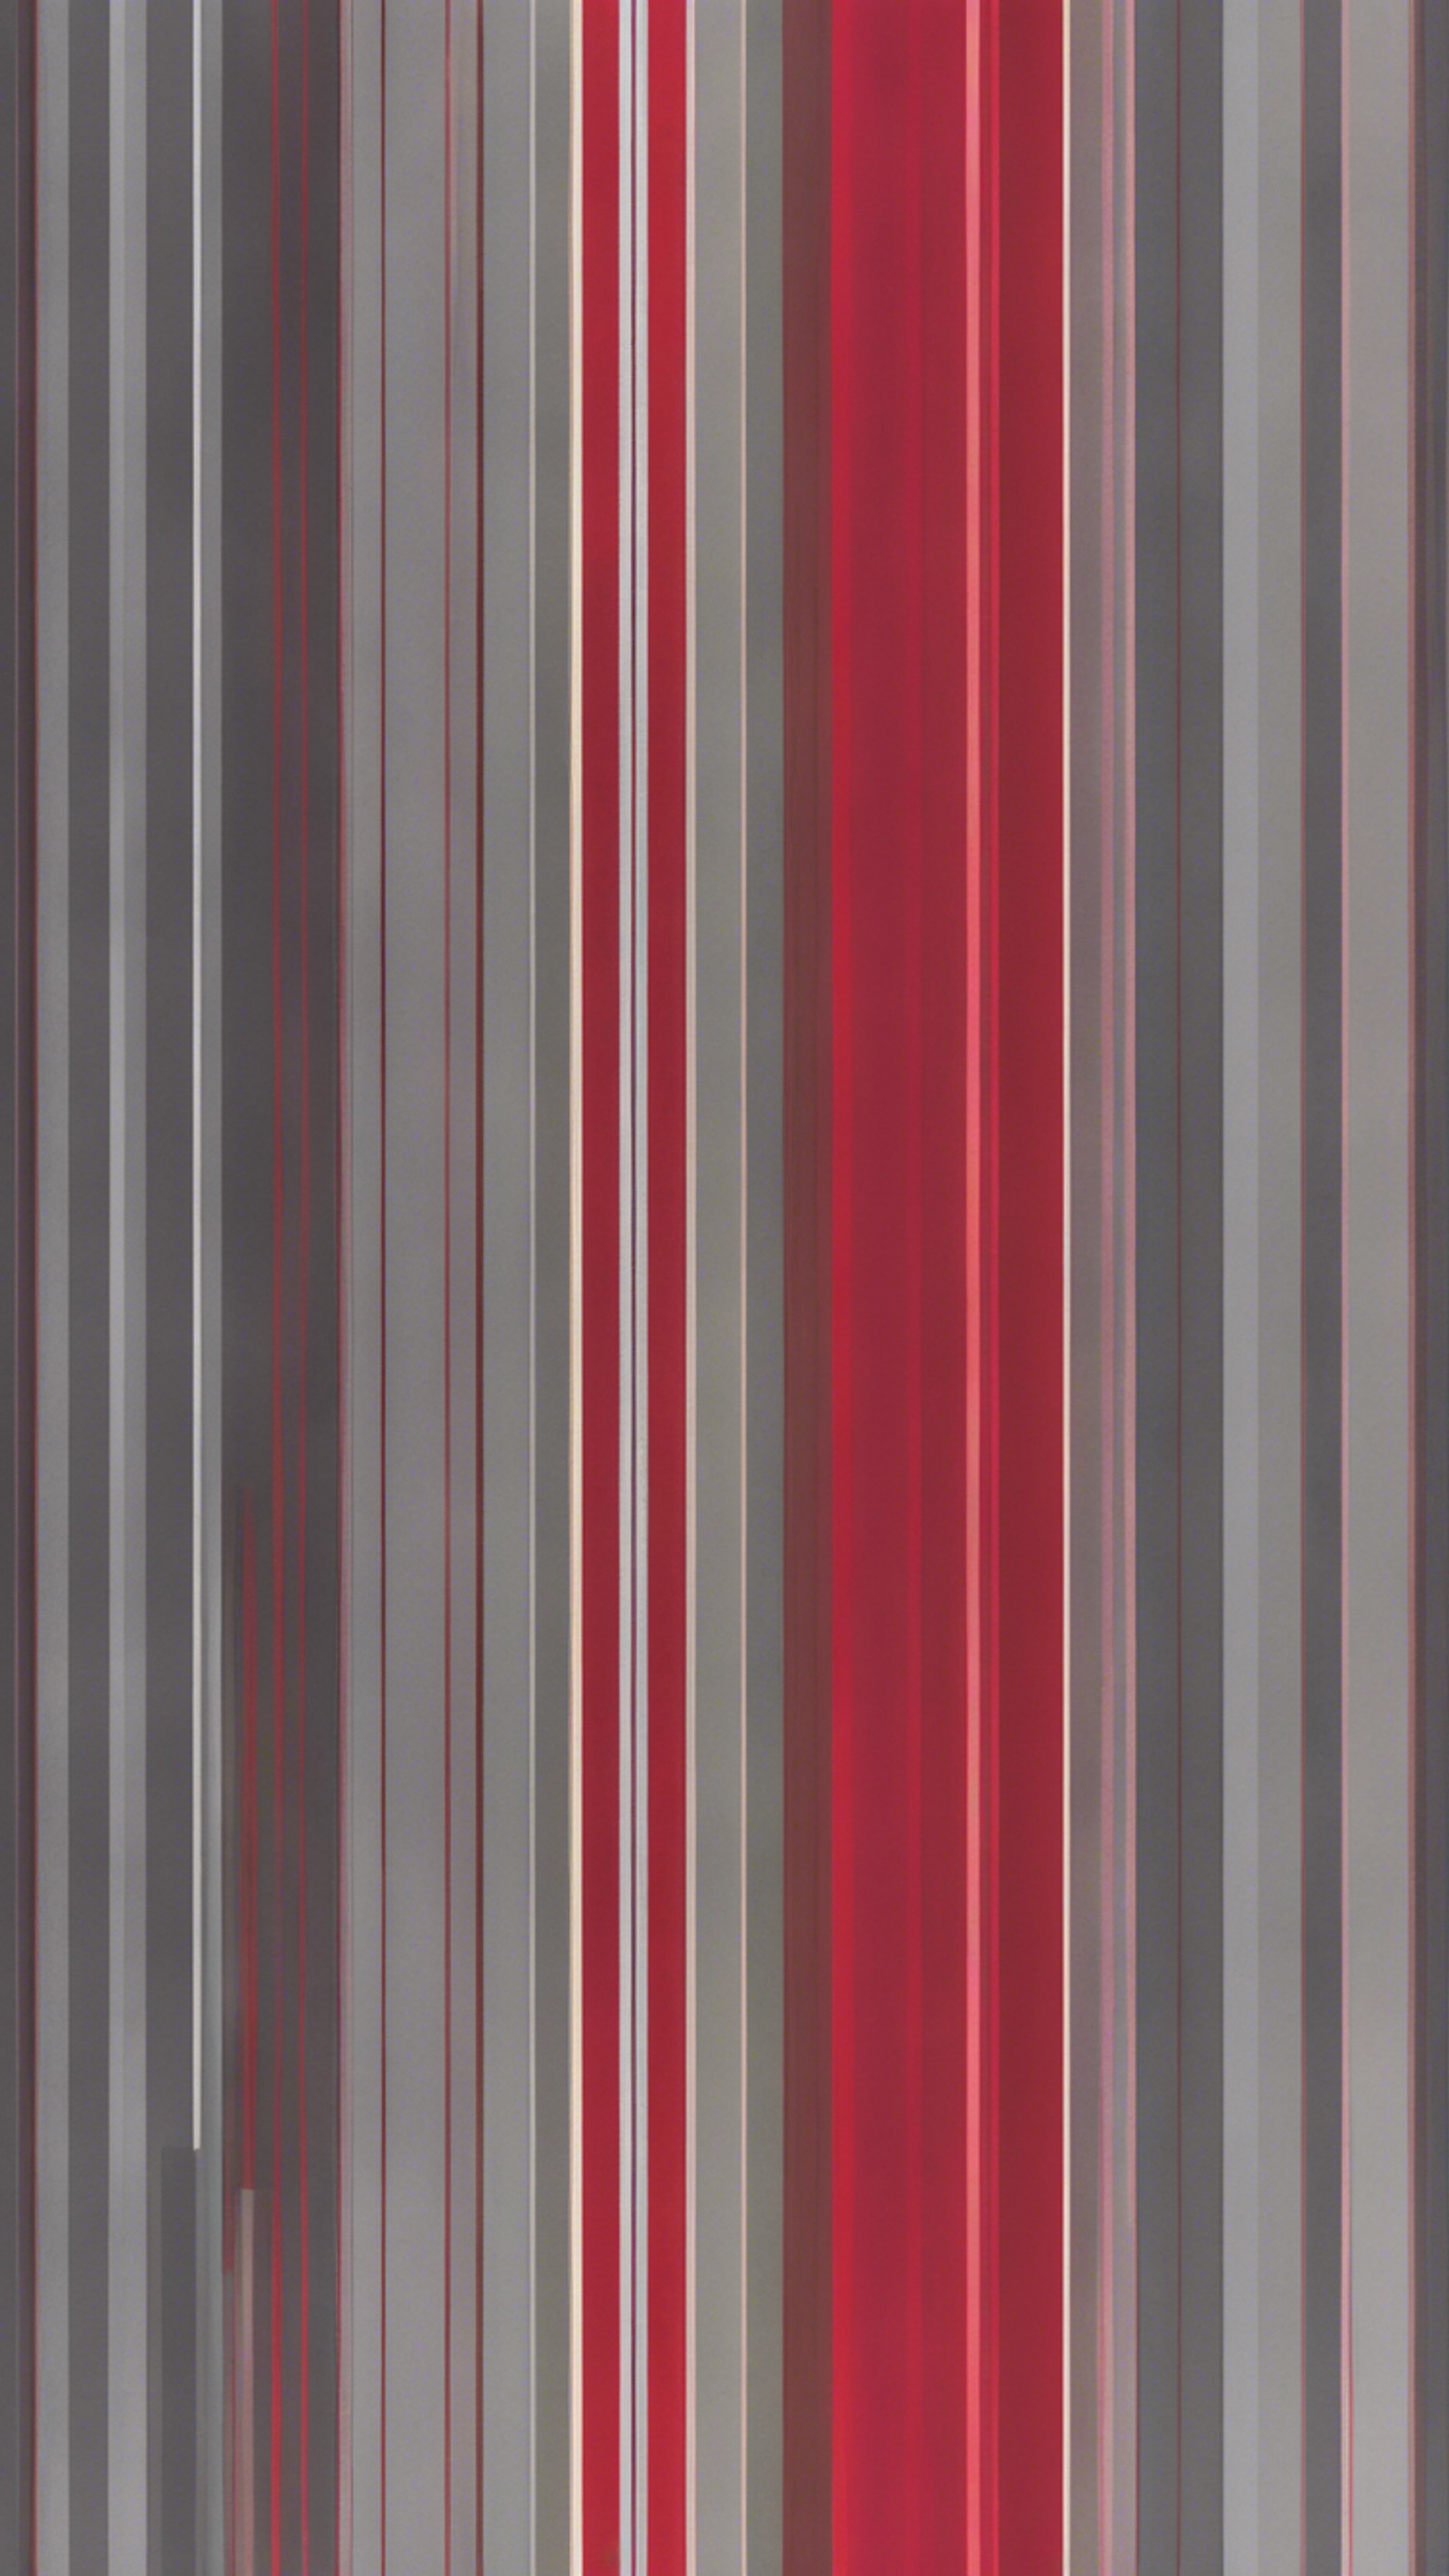 Pattern inspired by modern art, showcasing alternating bands of red and grey in a gradient arrangement. Wallpaper[fecd92d91f0c4817b510]